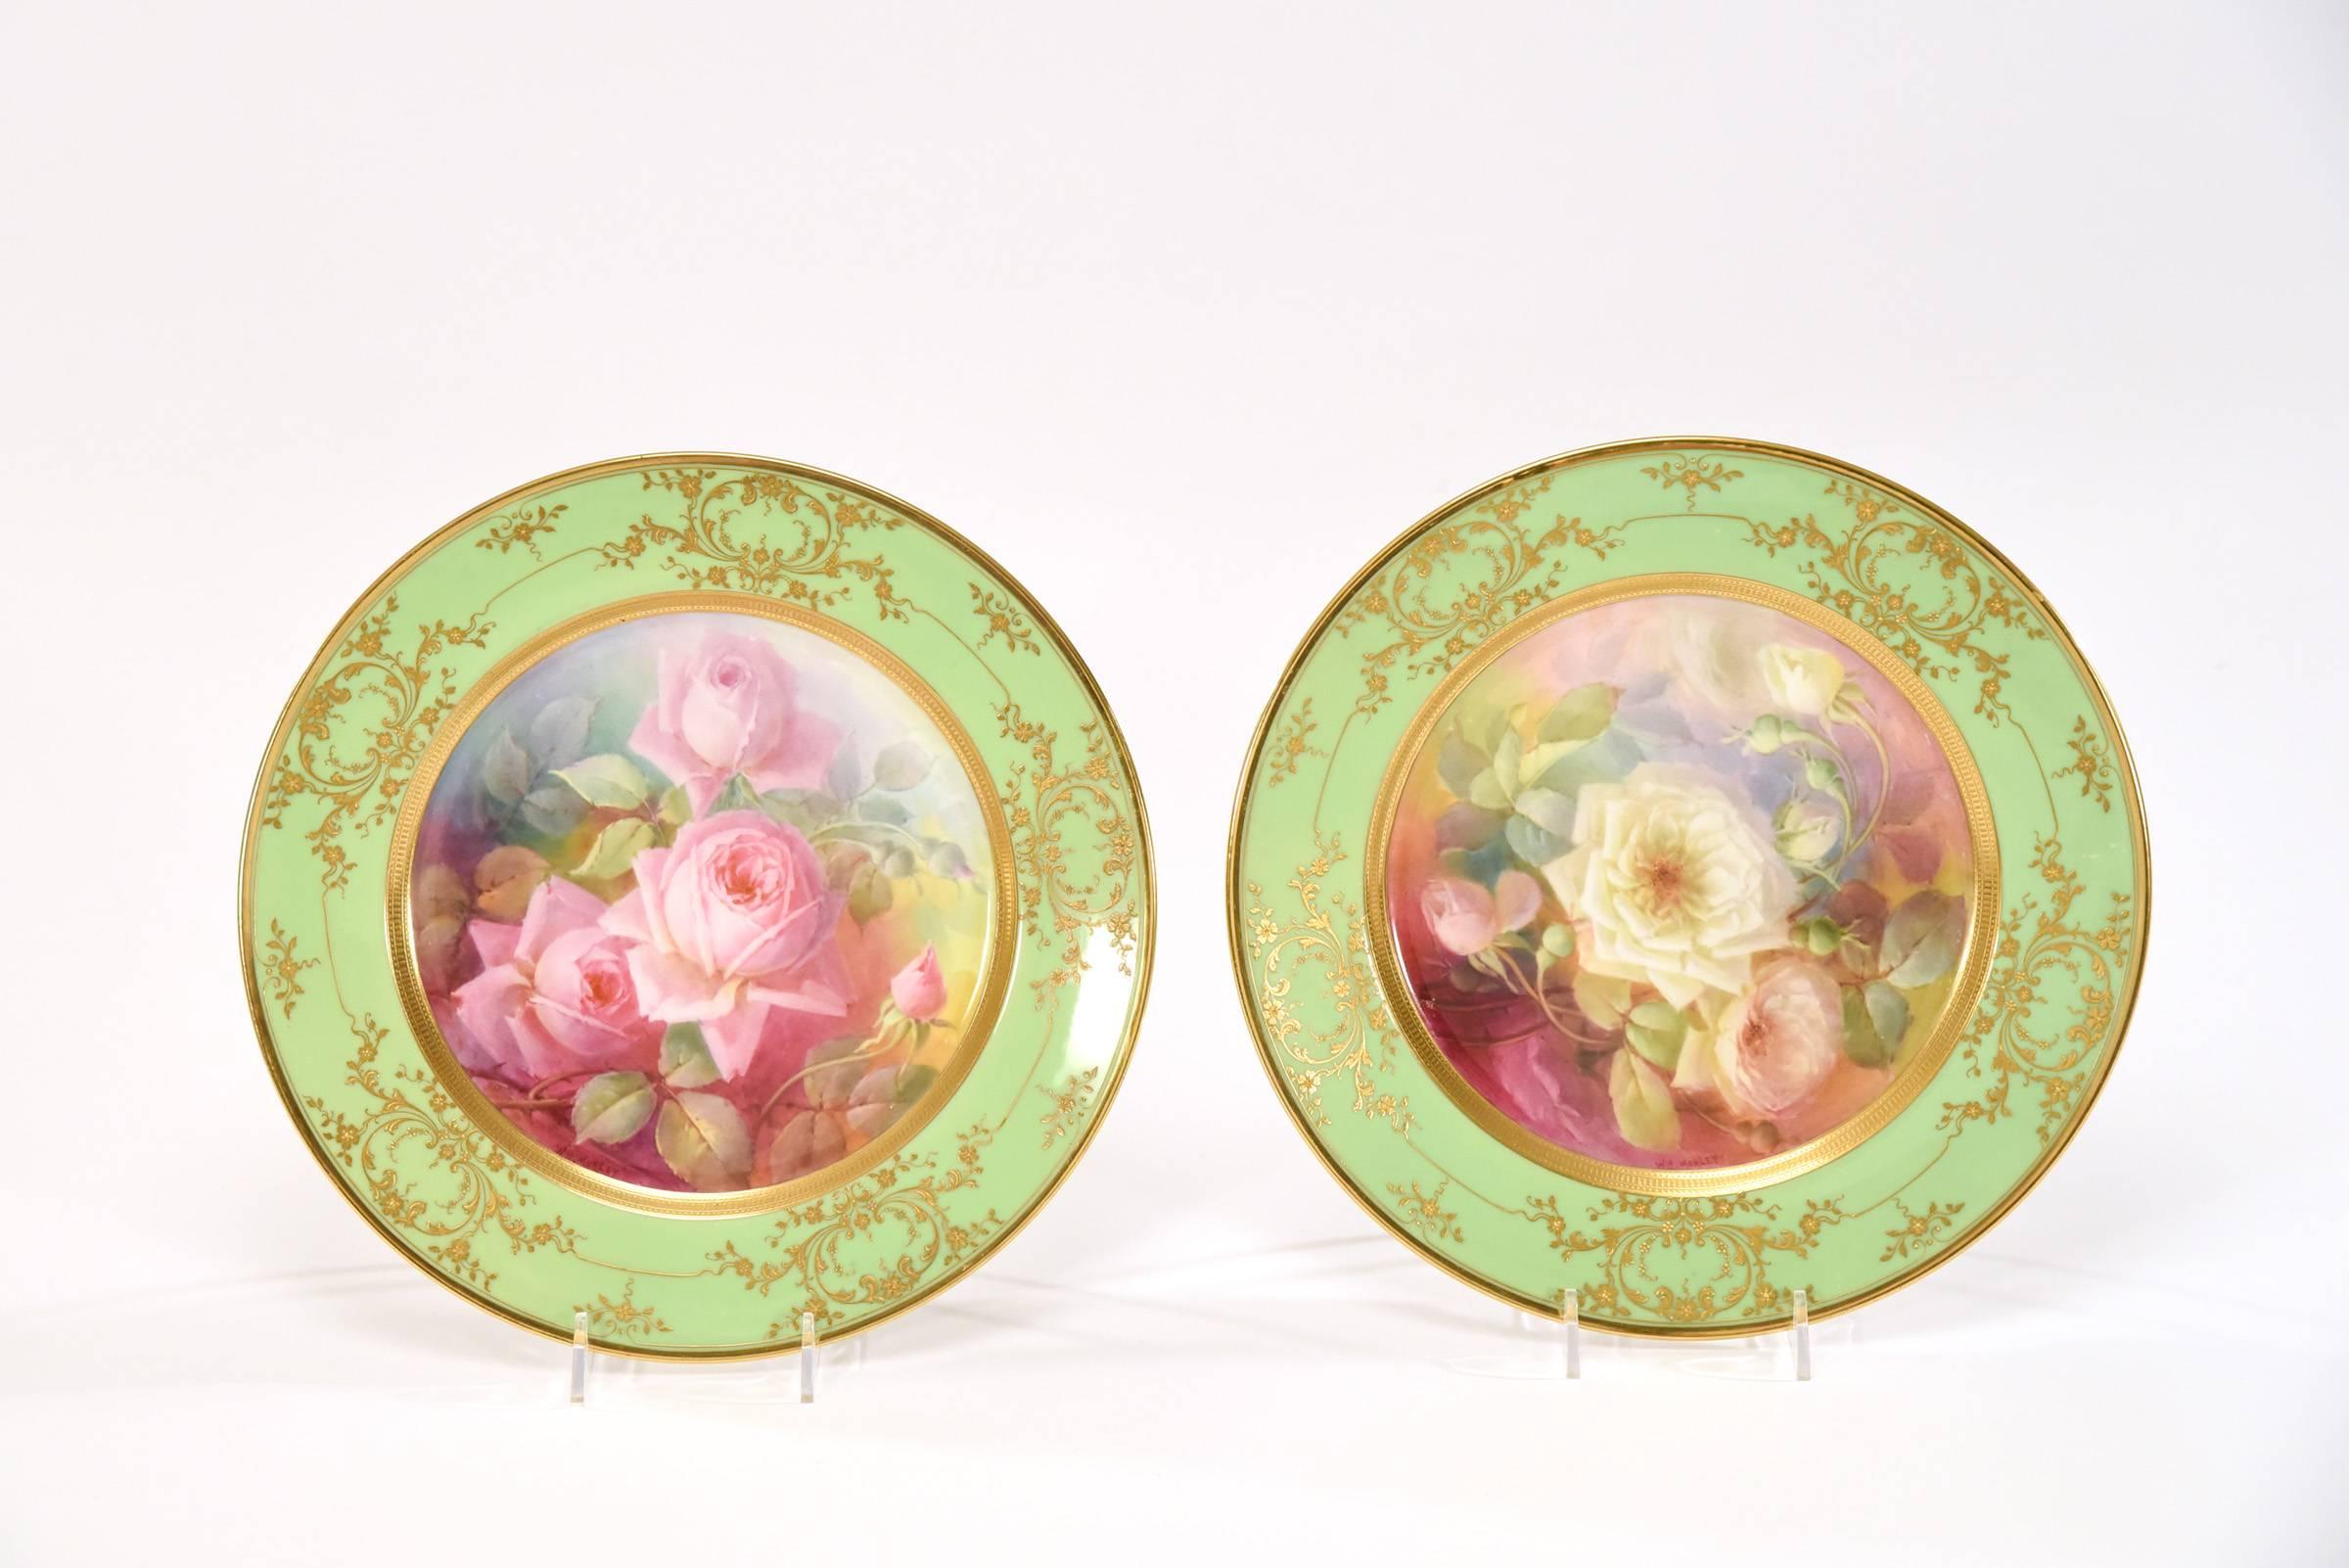 Ready for a museum, this set of 12 Lenox cabinet plates are all hand-painted and artist signed by William Morley, one of the most sought after and accomplished artists that worked at Lenox, circa 1920s.
Each plate depicts a rose grouping and